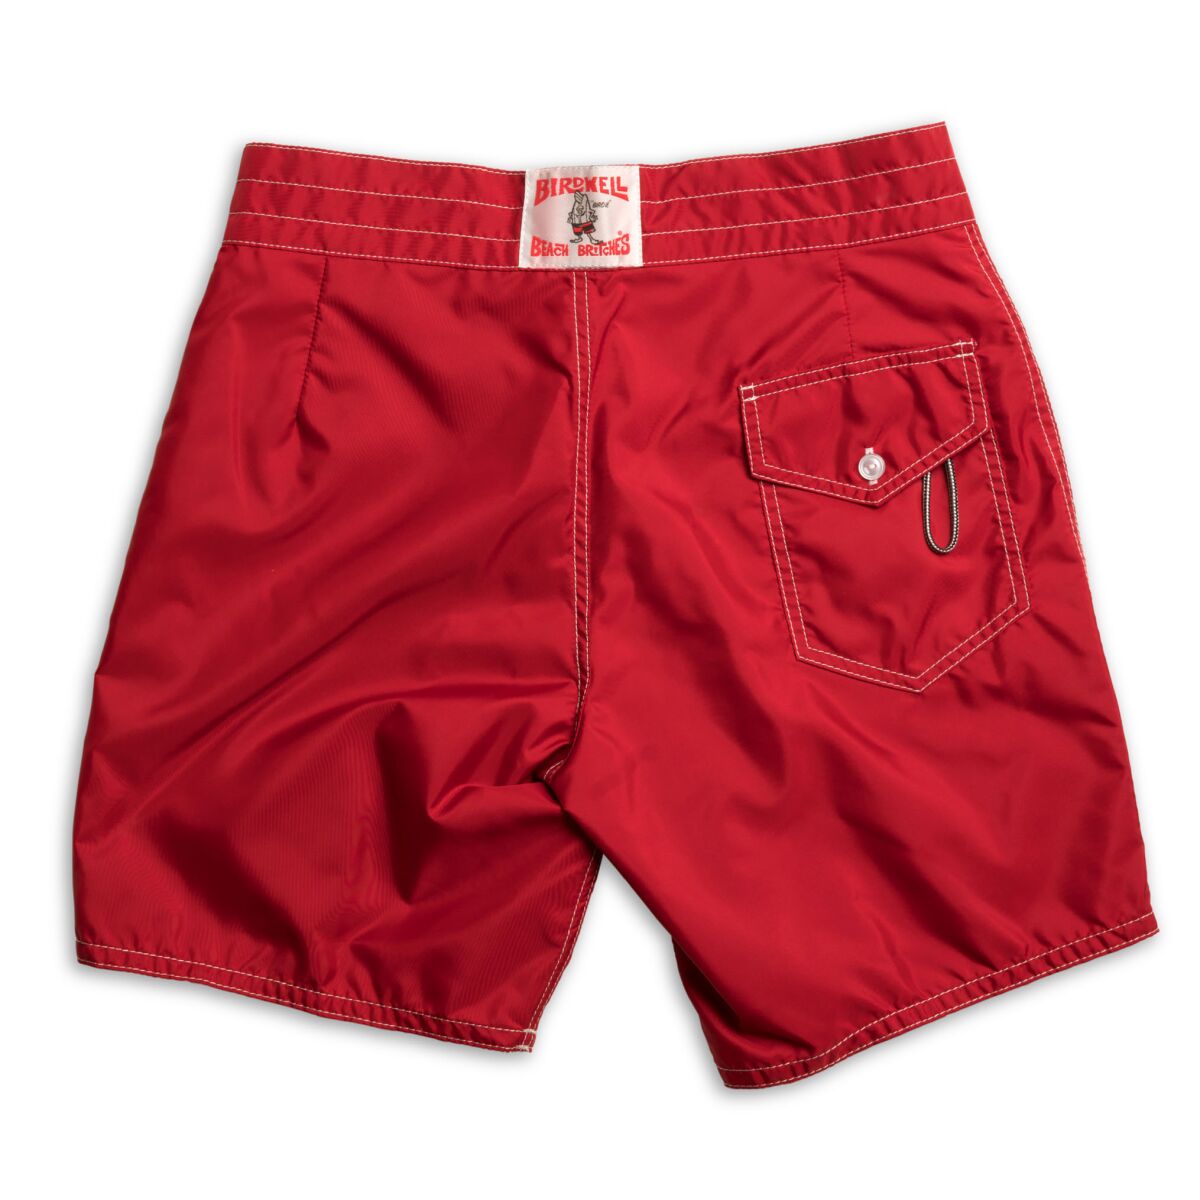 These iconic nylon surfer trunks, famous for drying fast, have been made by Birdwell in Santa Ana since 1961. 